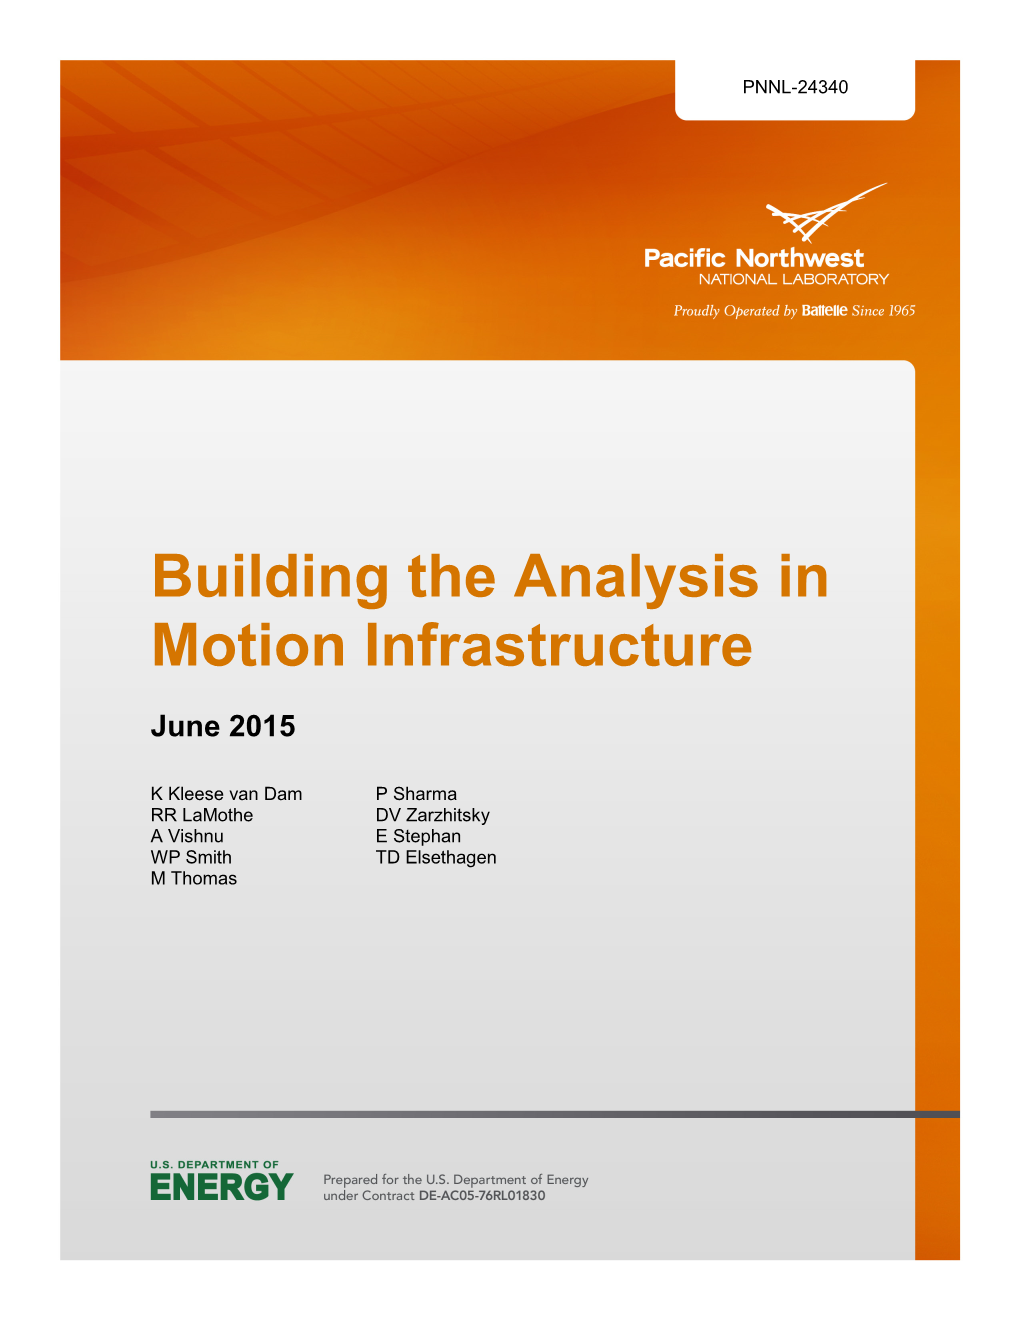 Building the Analysis in Motion Infrastructure June 2015